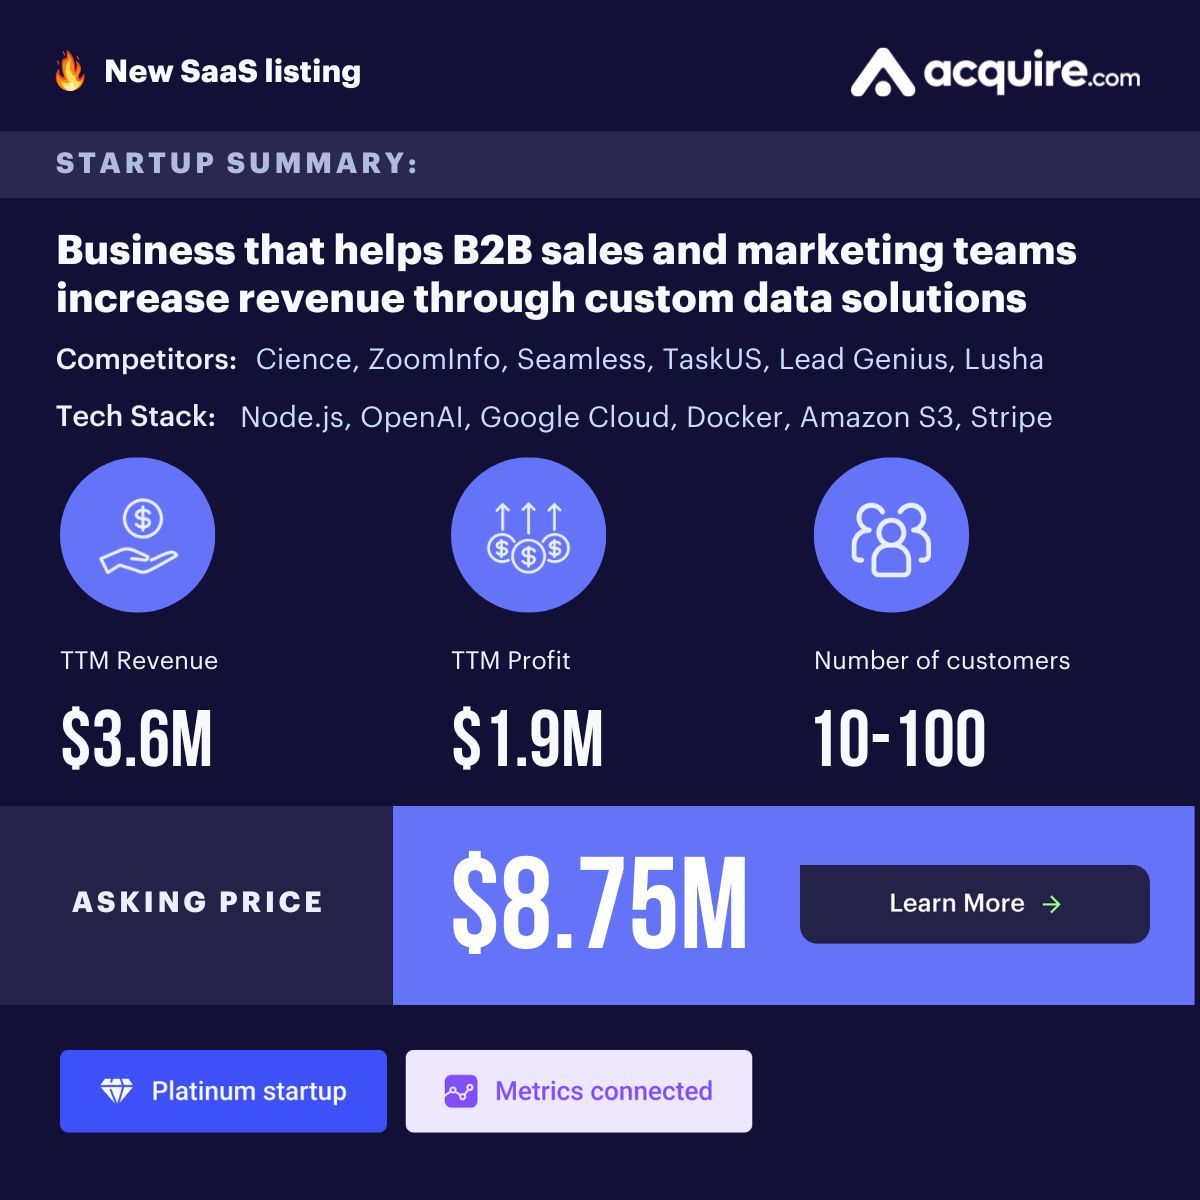 🔥 New GBA Startup Listed 🔥 SaaS | Business that helps B2B sales and marketing teams increase revenue through custom data solutions | $3.6M TTM revenue Asking Price: $8.75M Contact the seller here: buff.ly/3UZt9hU